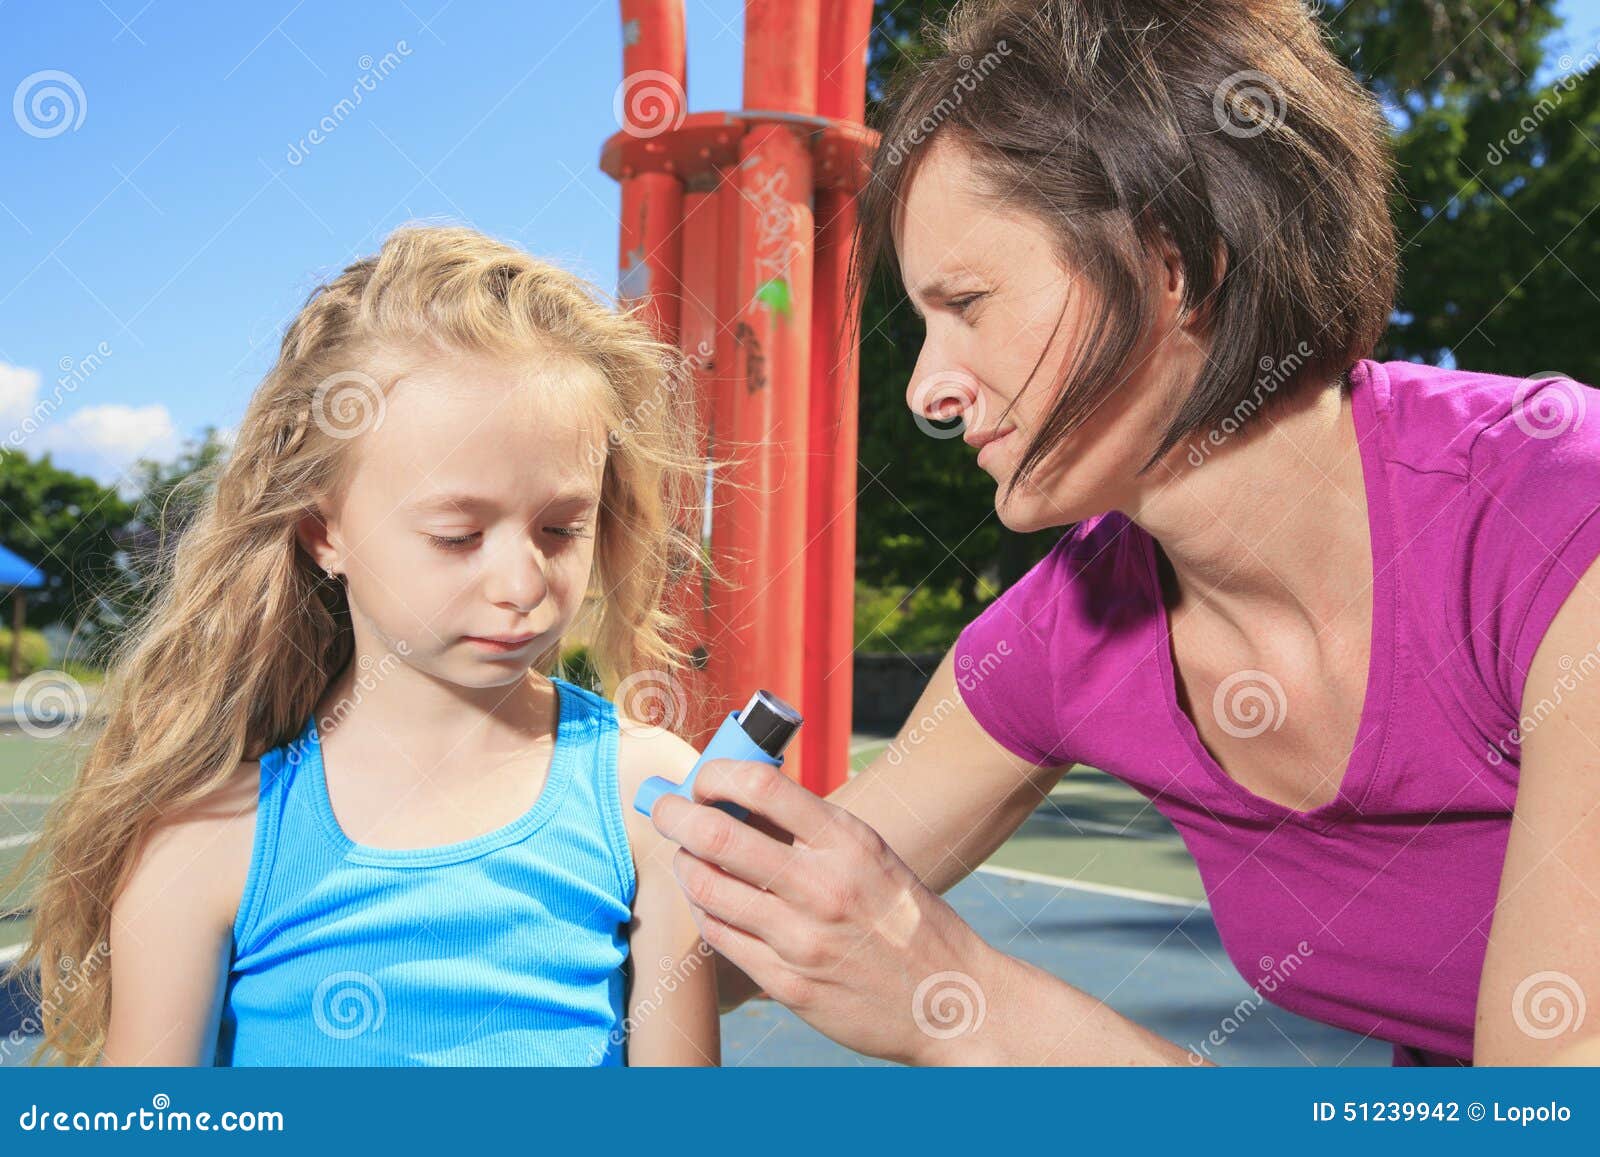 mother using inhaler with her asthmatic daughter